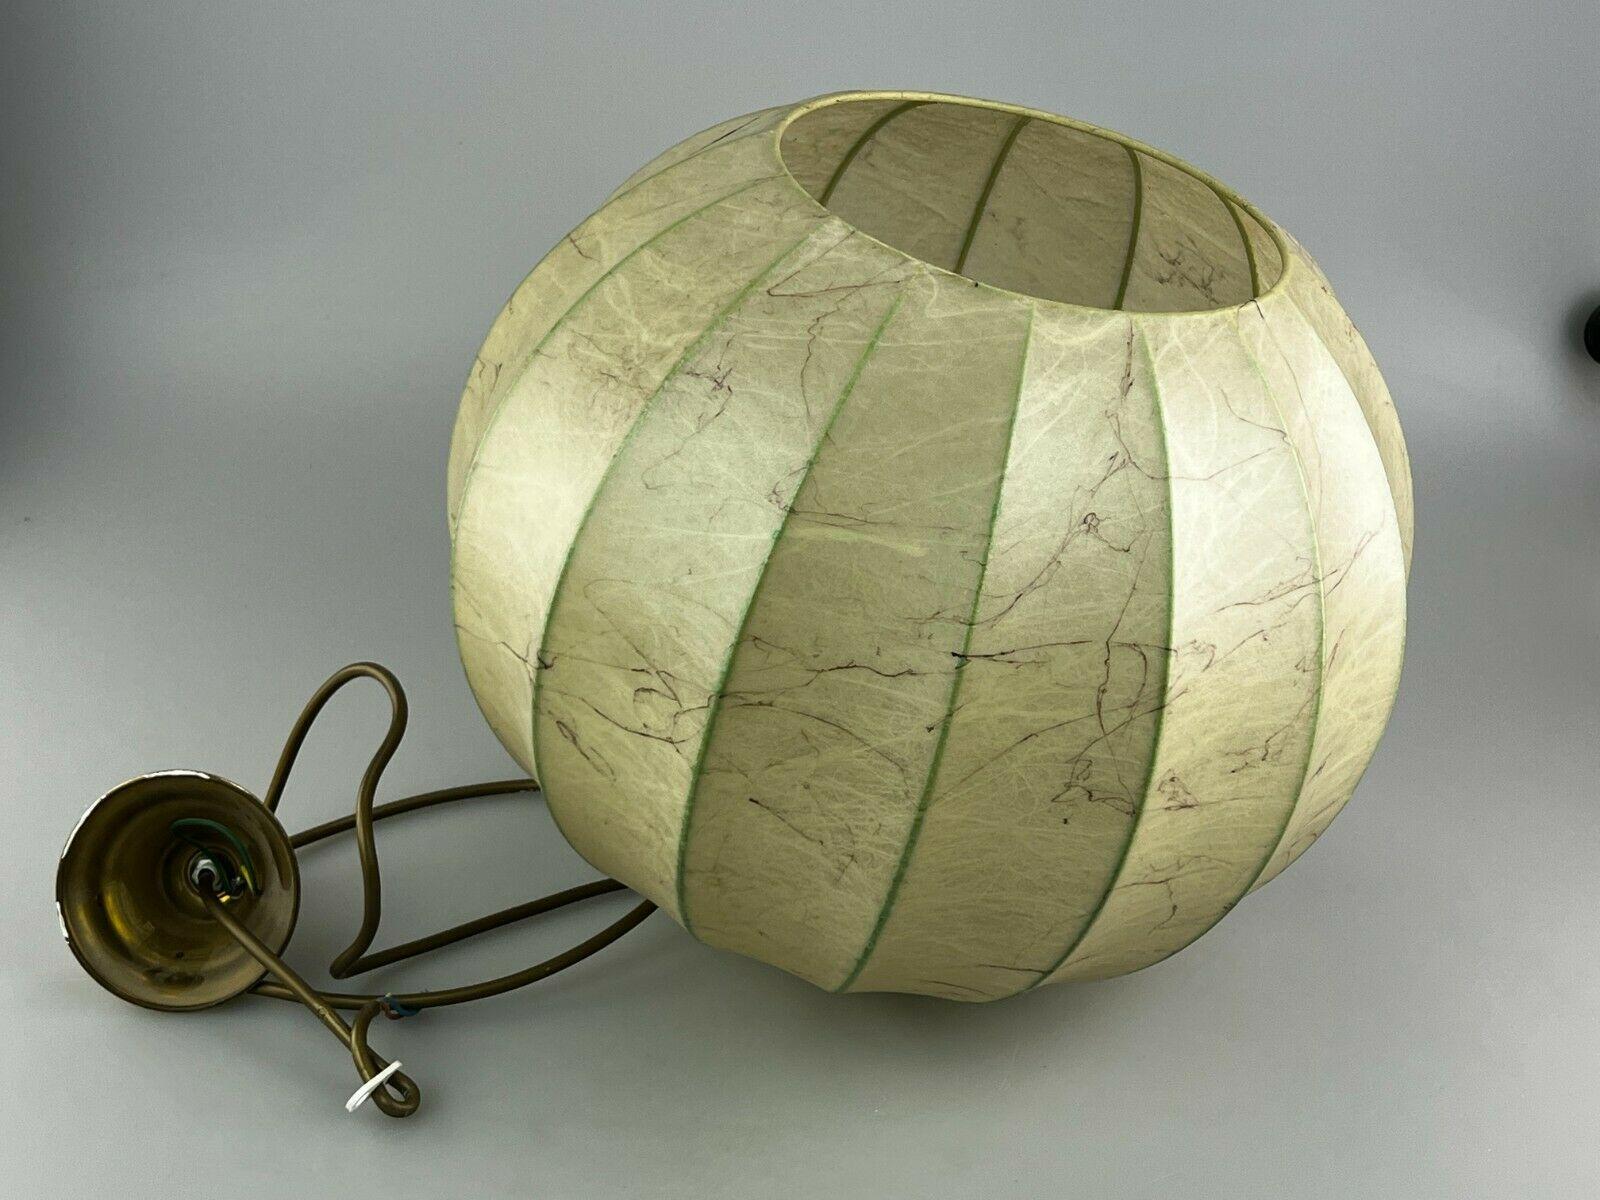 1960s 1970s Goldkant Lights Ball Lamp Cocoon Moonlamp Space Age Design Object:  4